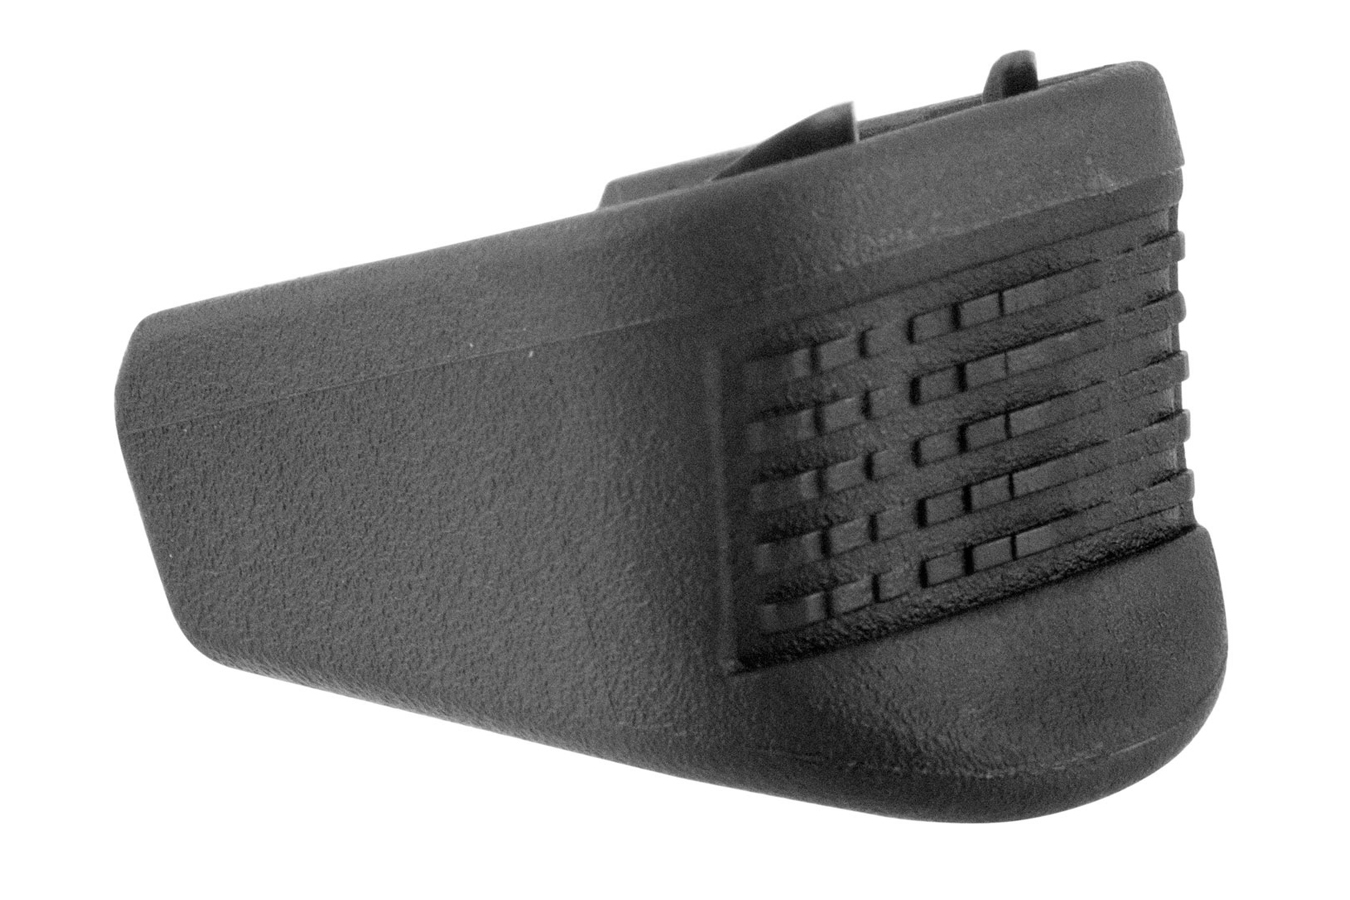 MAGAZINE EXTENSION FOR GLOCK